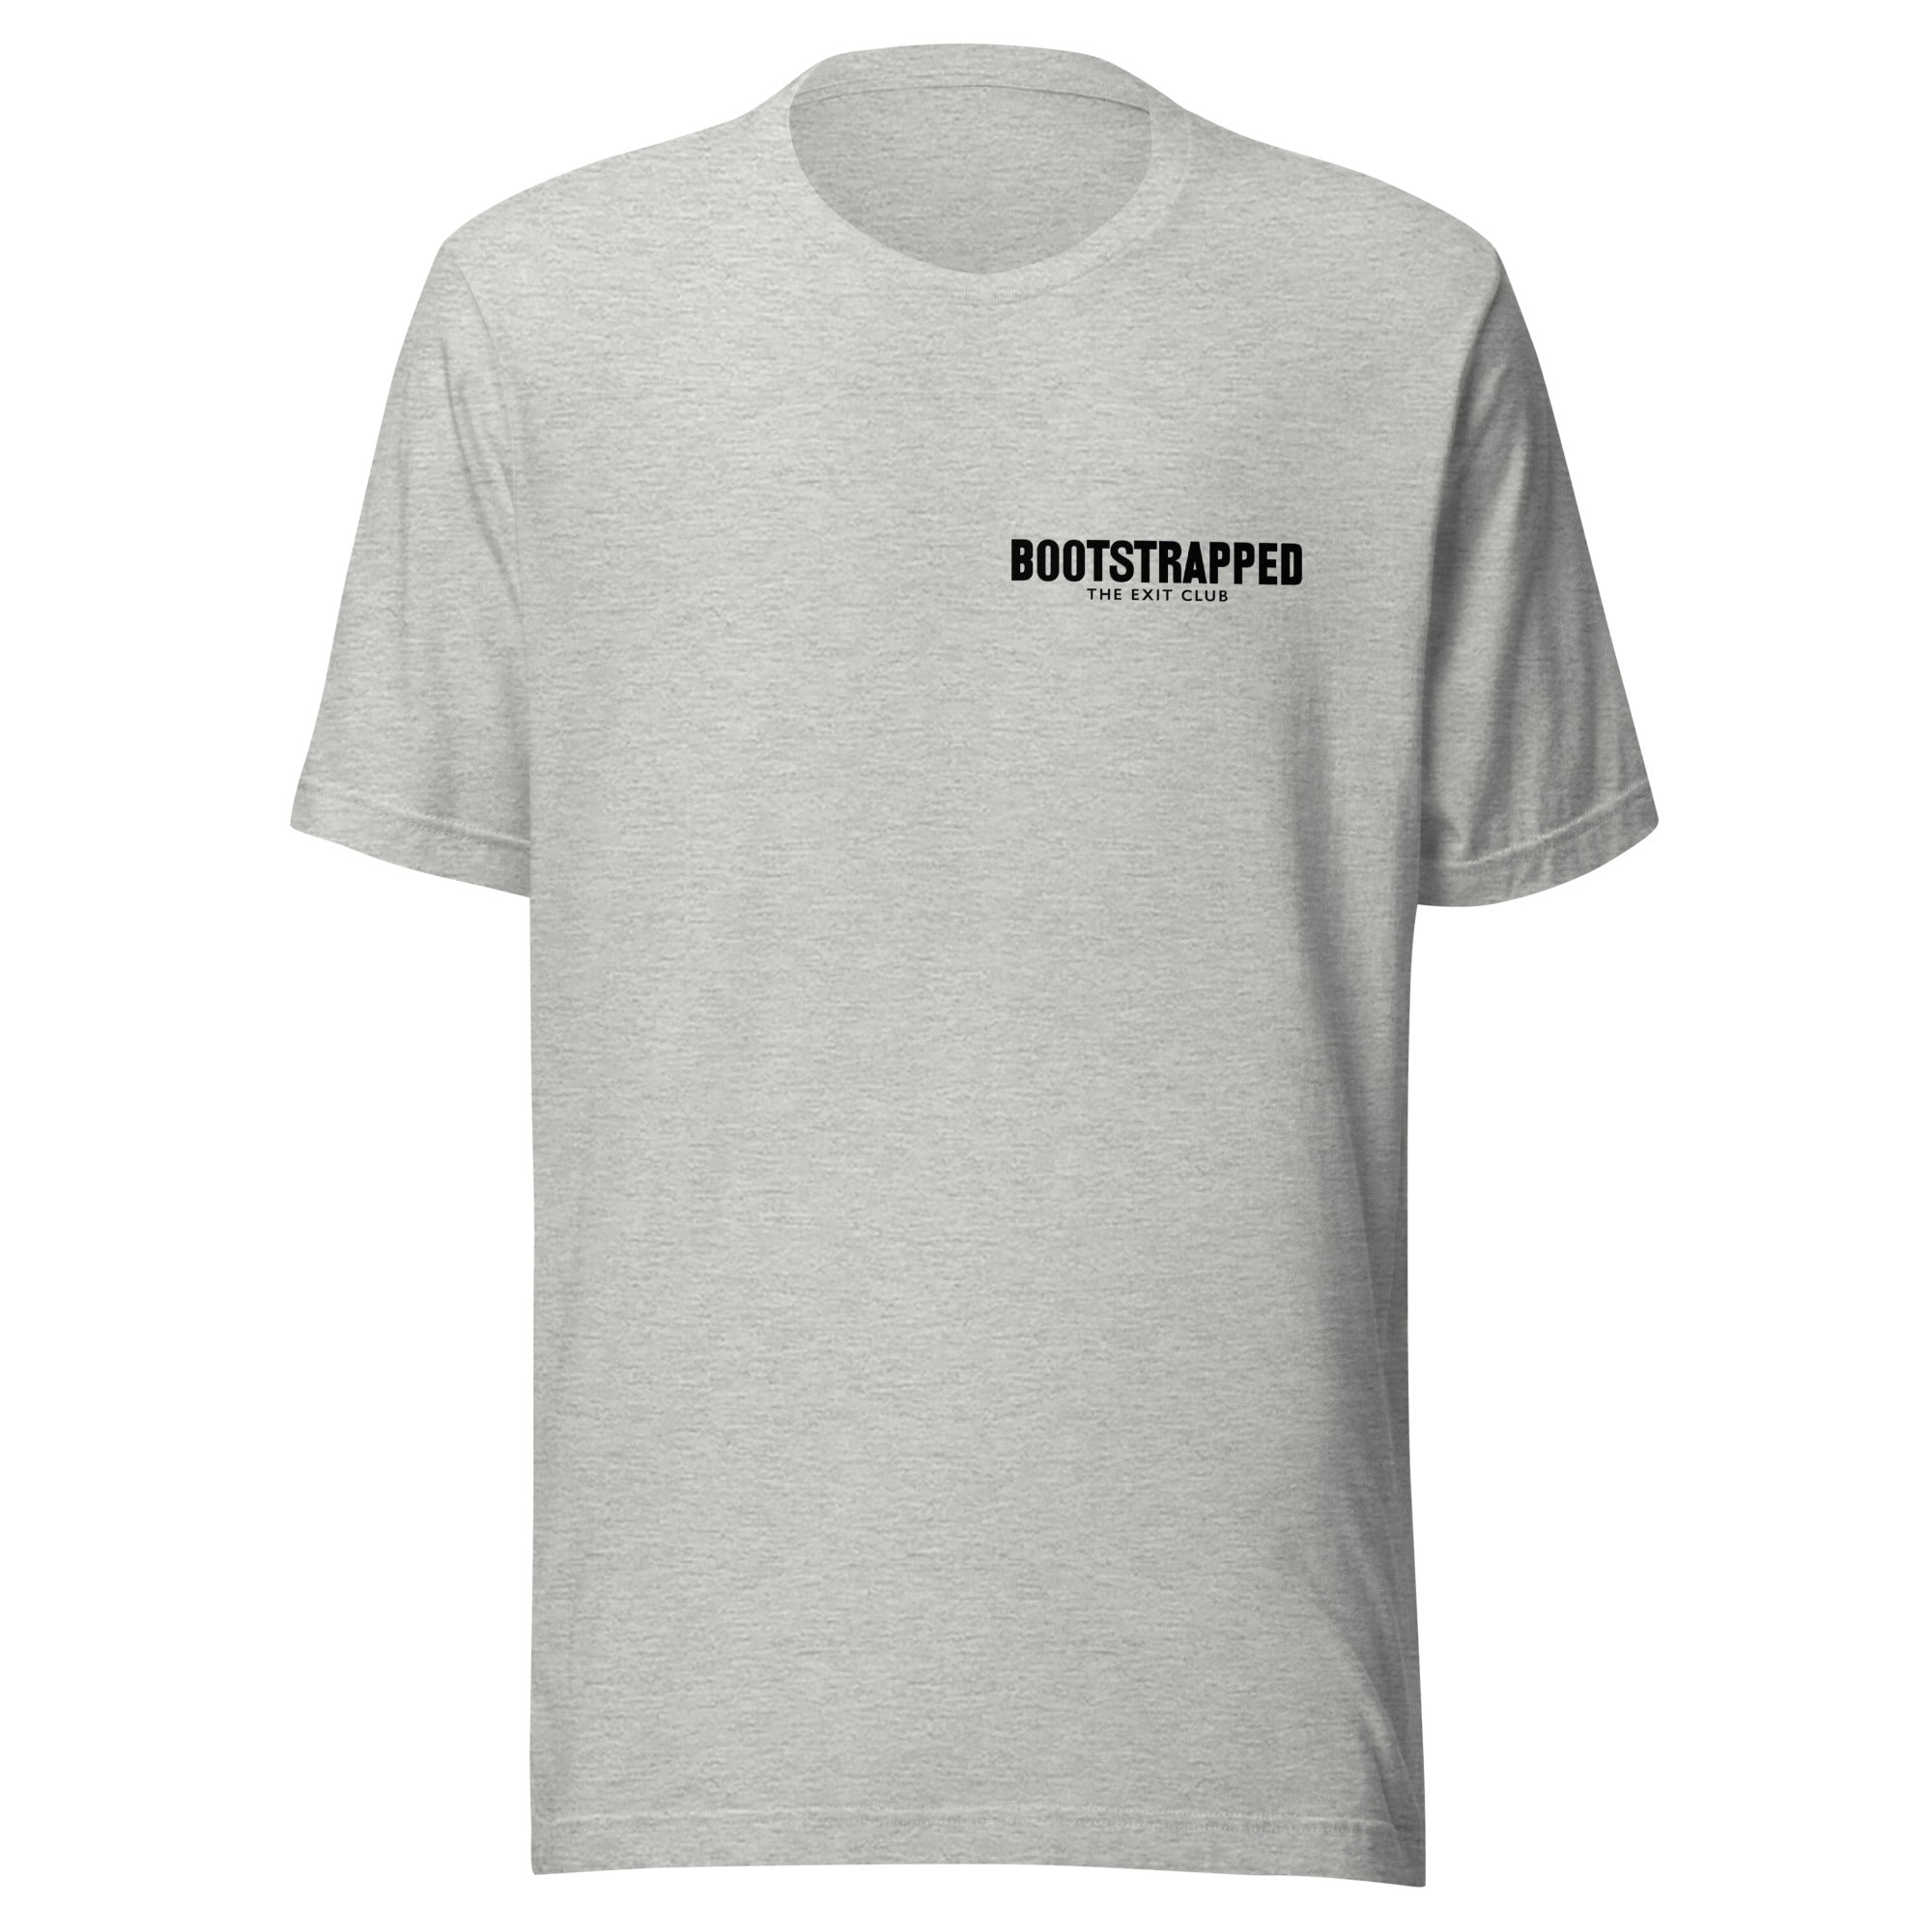 BOOTSTRAPPED T-SHIRT